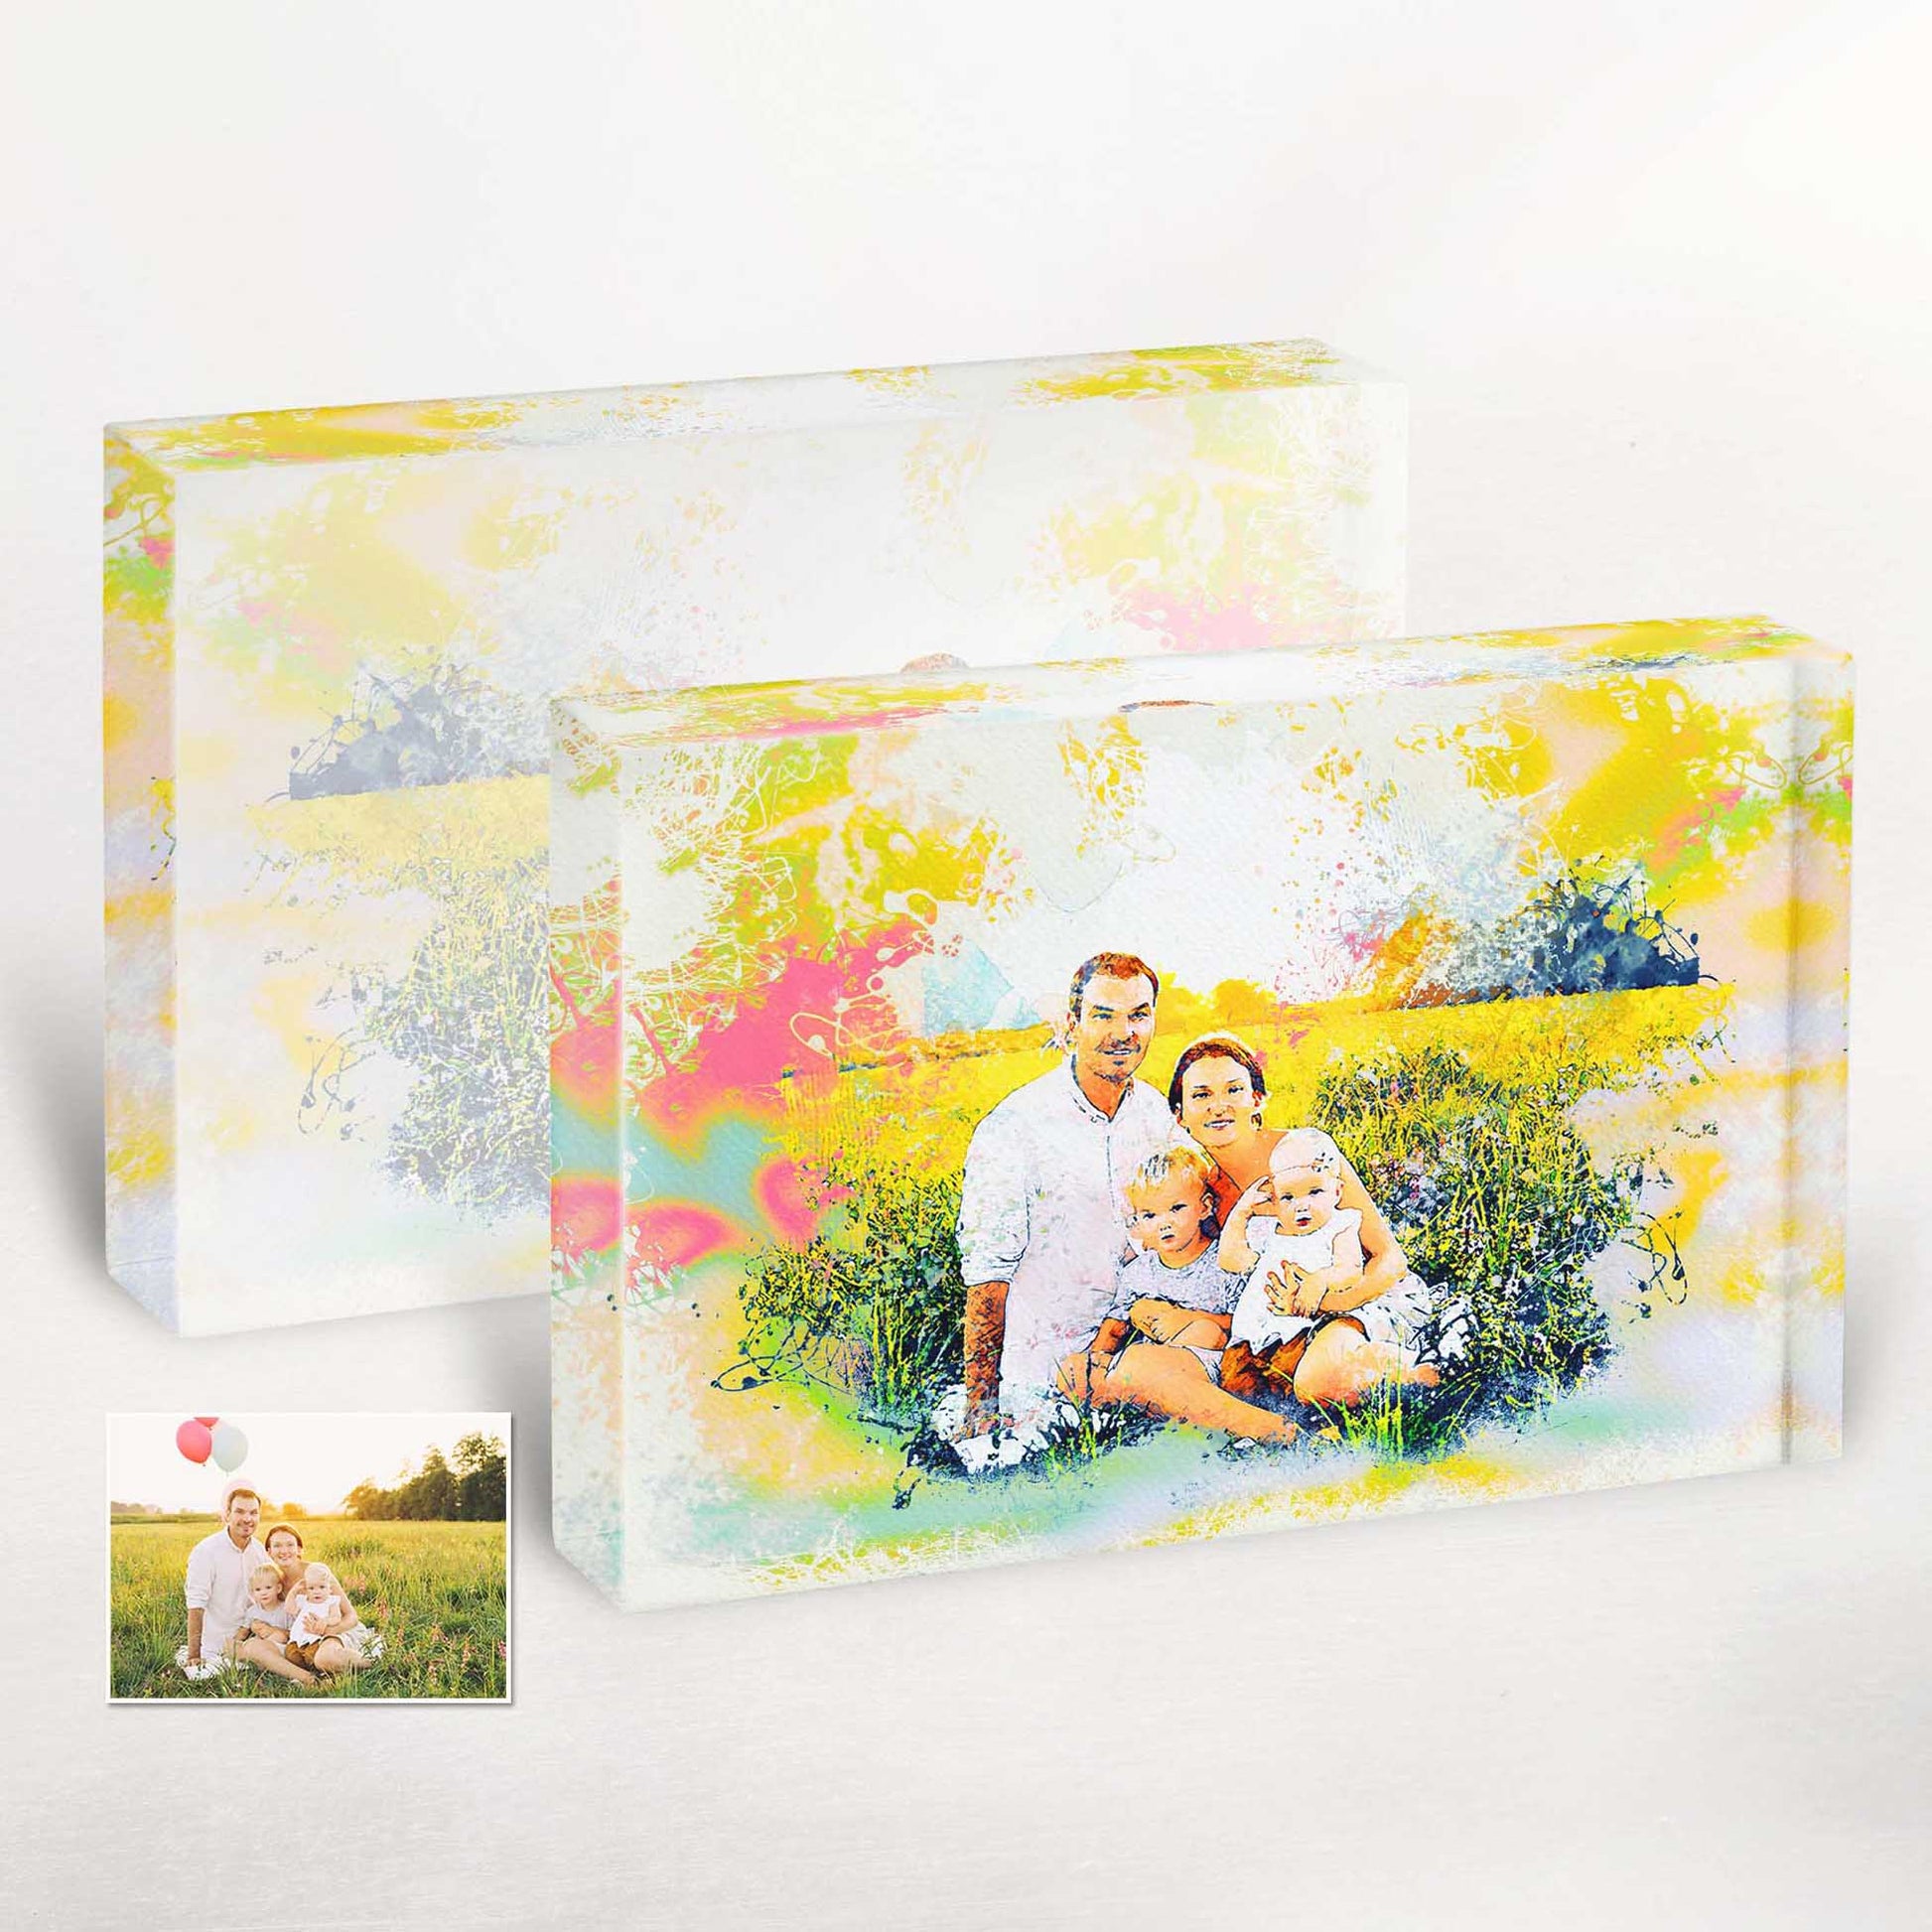 Our Personalised Splash Watercolor Acrylic Block Photo is a cool and creative way to capture your most cherished moments. The vibrant splash effect adds an inspirational and unique touch to your home decor